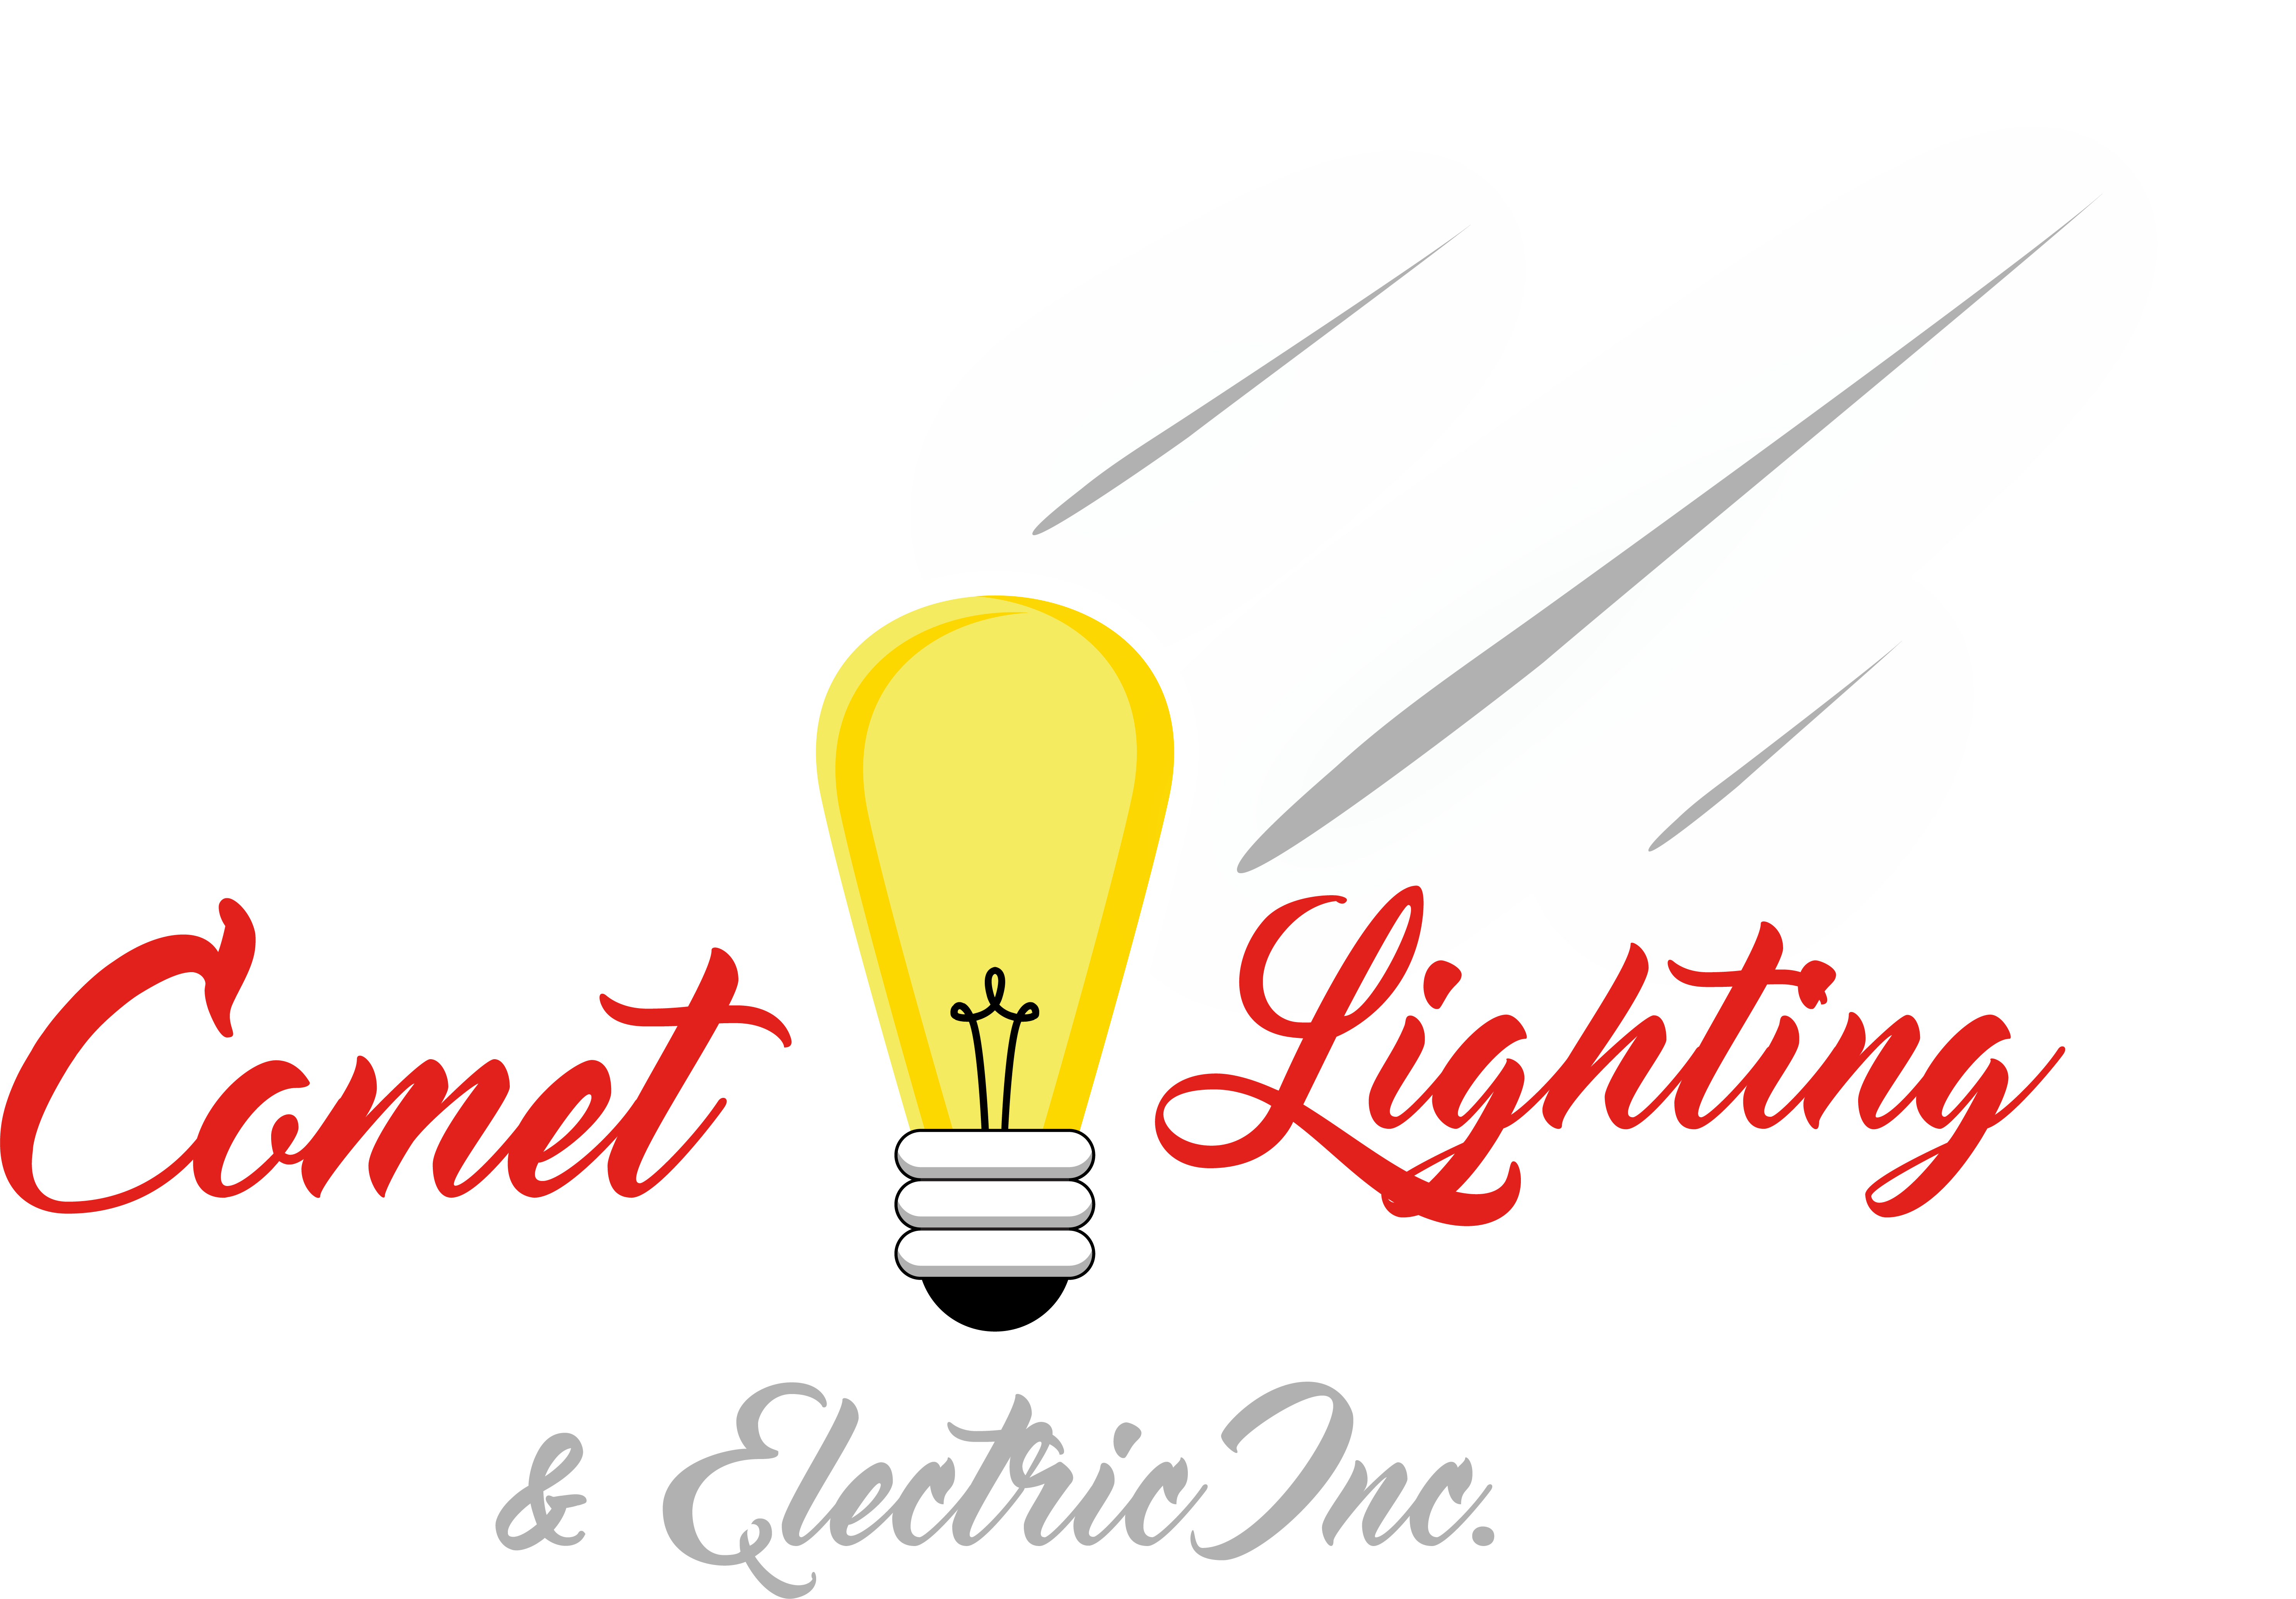 Home - Lighting and Electric